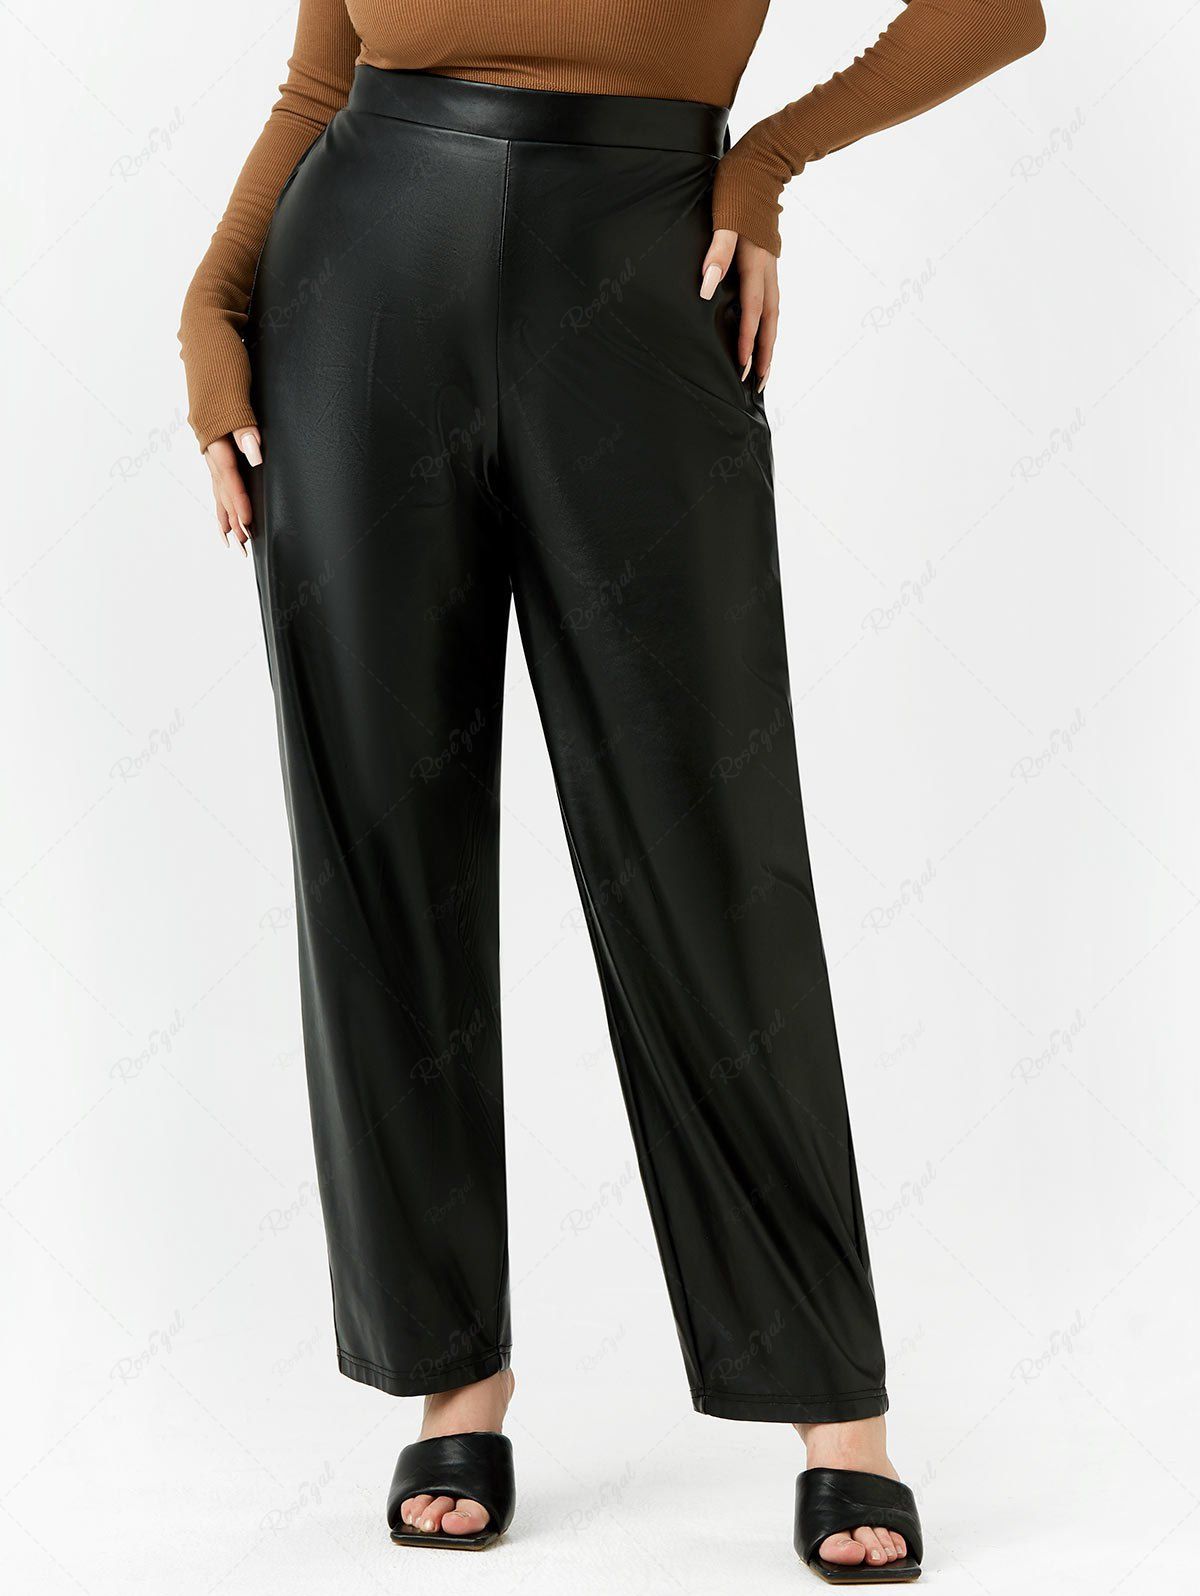 Buy Plus Size Faux Leather Straight Pull On Pants  